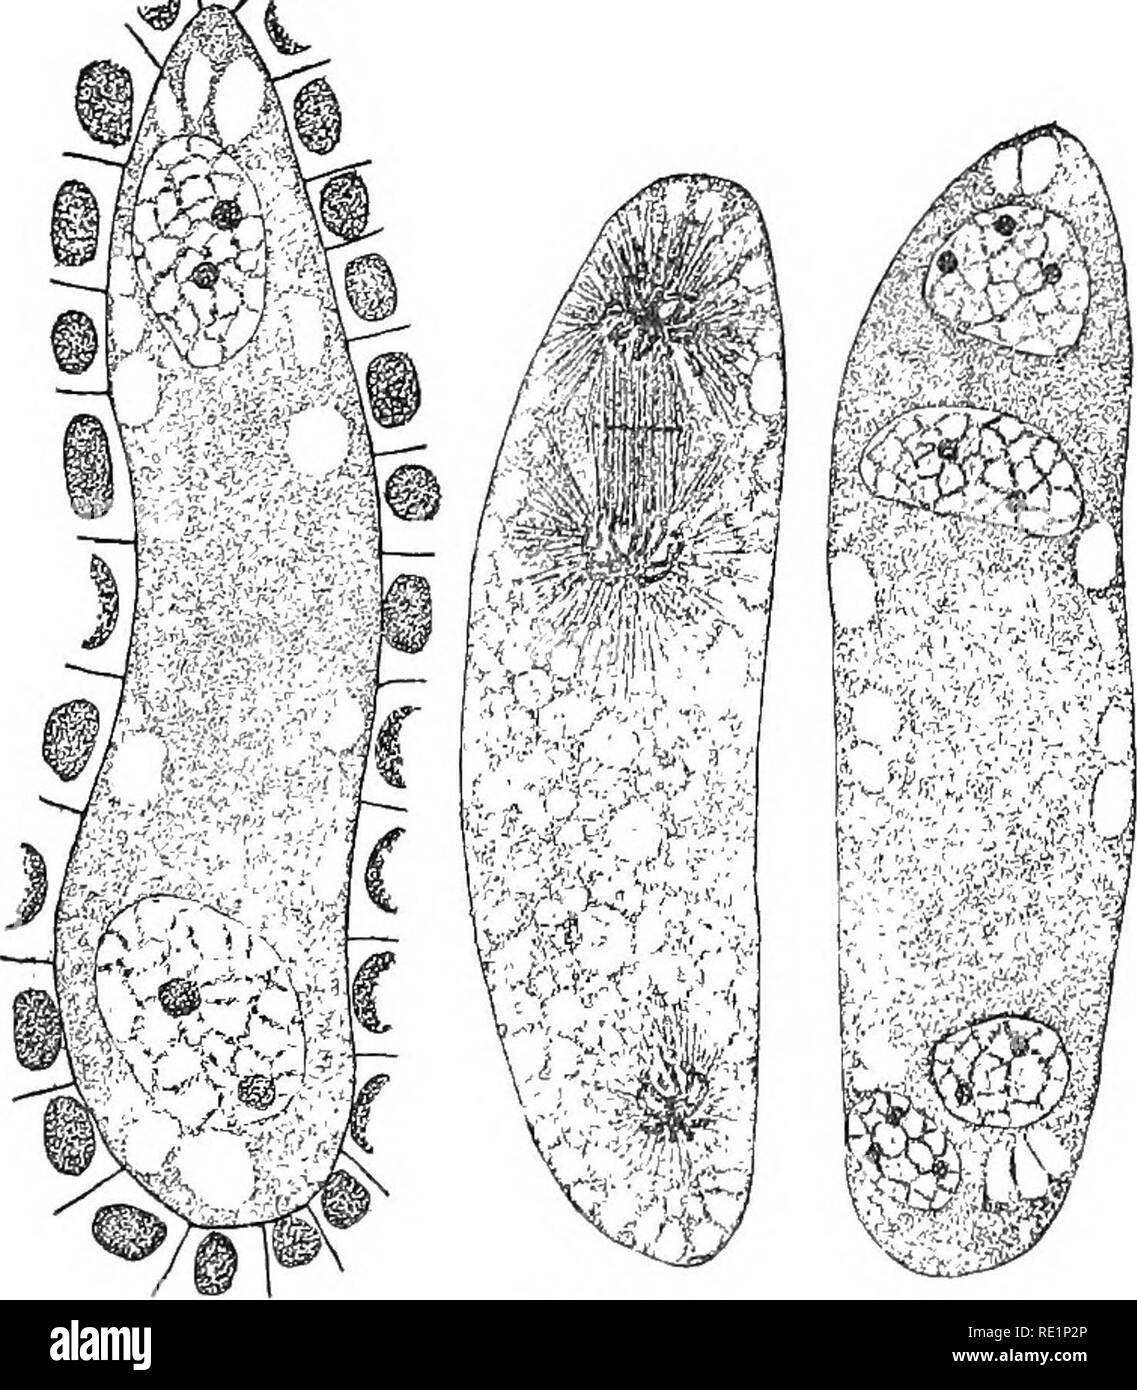 . Elementary botany. Botany. 232 MORPHOLOGY. size of the female nucleus before the fusion of the two takes place. In figs. 306 and 307 are shown the entering pollen tube with the sperm nucleus, and the fusion of the male and female nuclei. 457. Fertilization in plants is fundamentally the same as in animals.—In all the great groups of plants as represented by spirogyra, cedogonium, vaucheria, peronospora, ferns, gymno-. Fig. 304. Two- and four-celled stage of embryo-sac of lilium. The middle one shows division of nuclei to form the four-celled stage. (Easter lily.) sperms, and in the angiospen Stock Photo